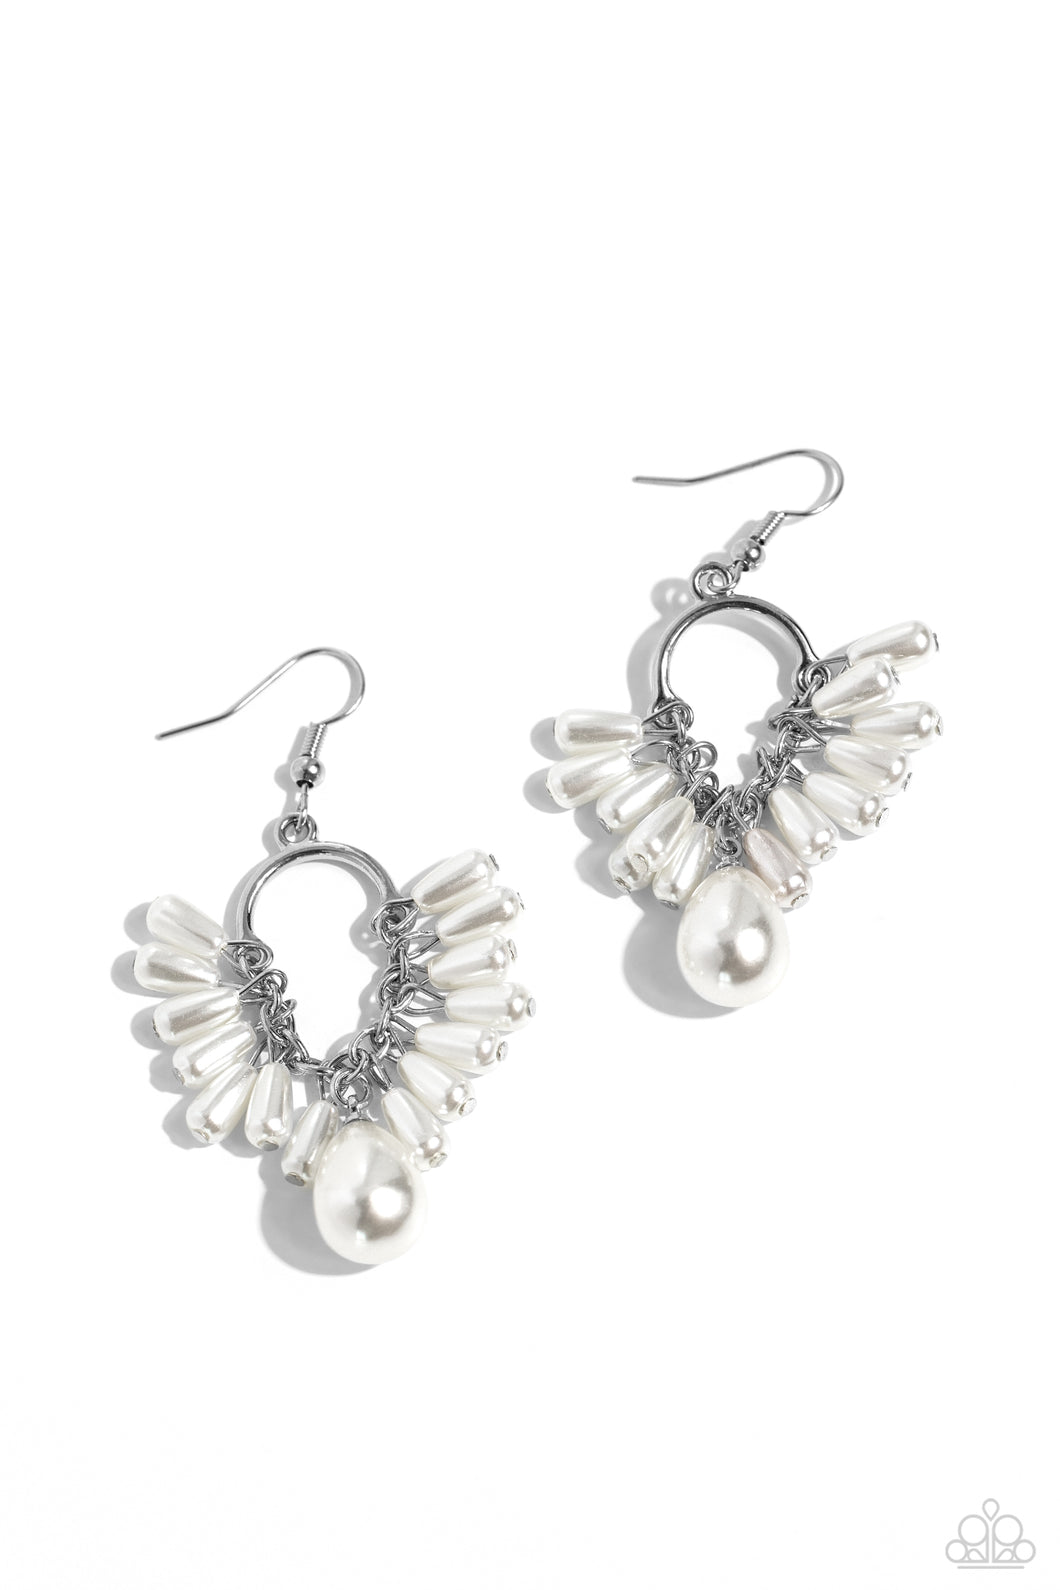 Ahoy There! - White (Pearl) Earring